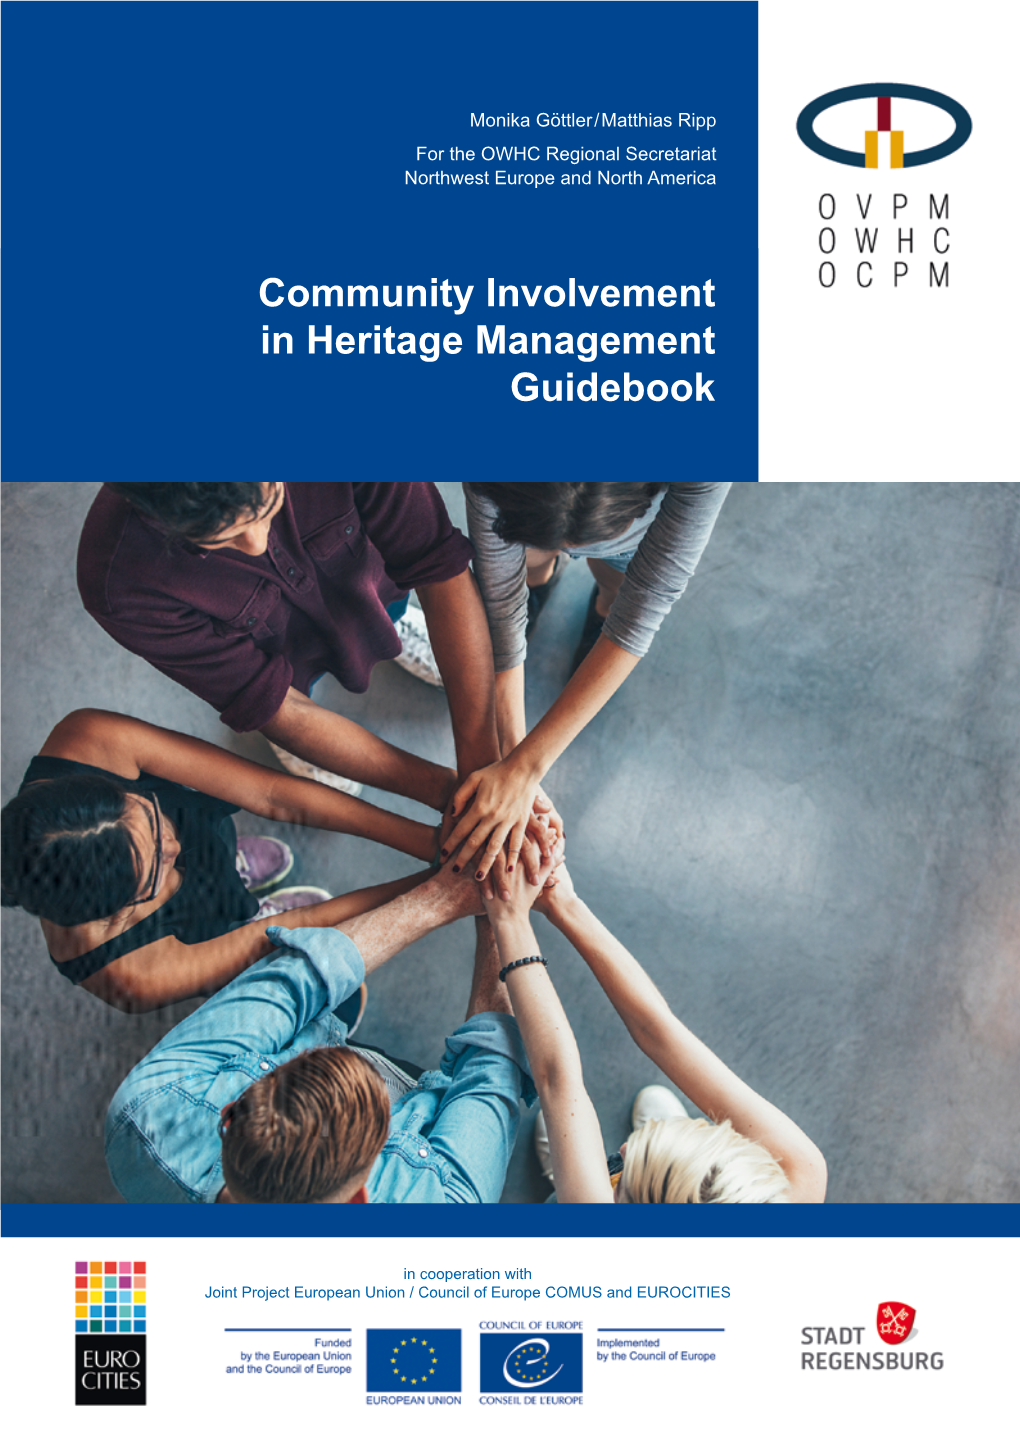 Community Involvement in Heritage Management Guidebook